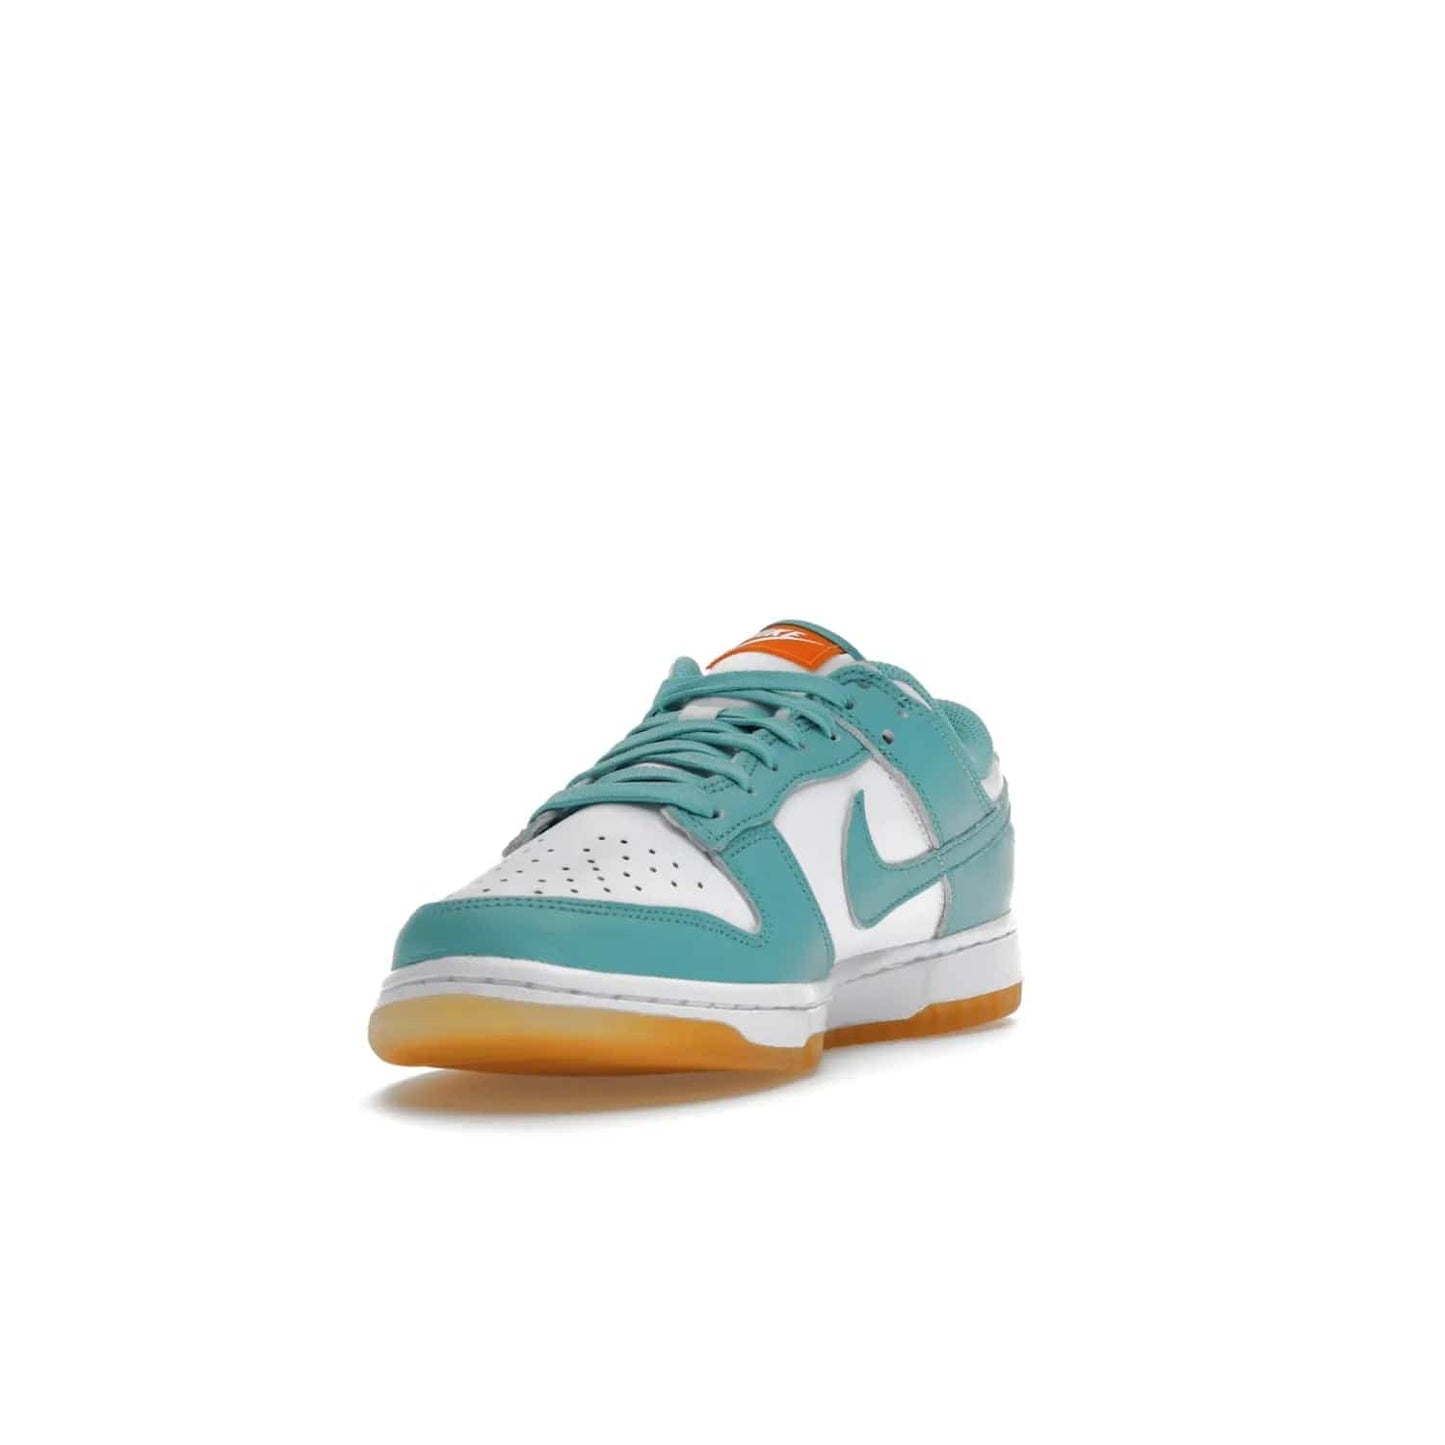 Nike Dunk Low Teal Zeal (Women's) - Image 13 - Only at www.BallersClubKickz.com - A white leather upper with teal overlays and Swooshes, plus yellow and embroidered accents make the Nike Dunk Low Teal Zeal (Women's) the perfect statement piece for any wardrobe.